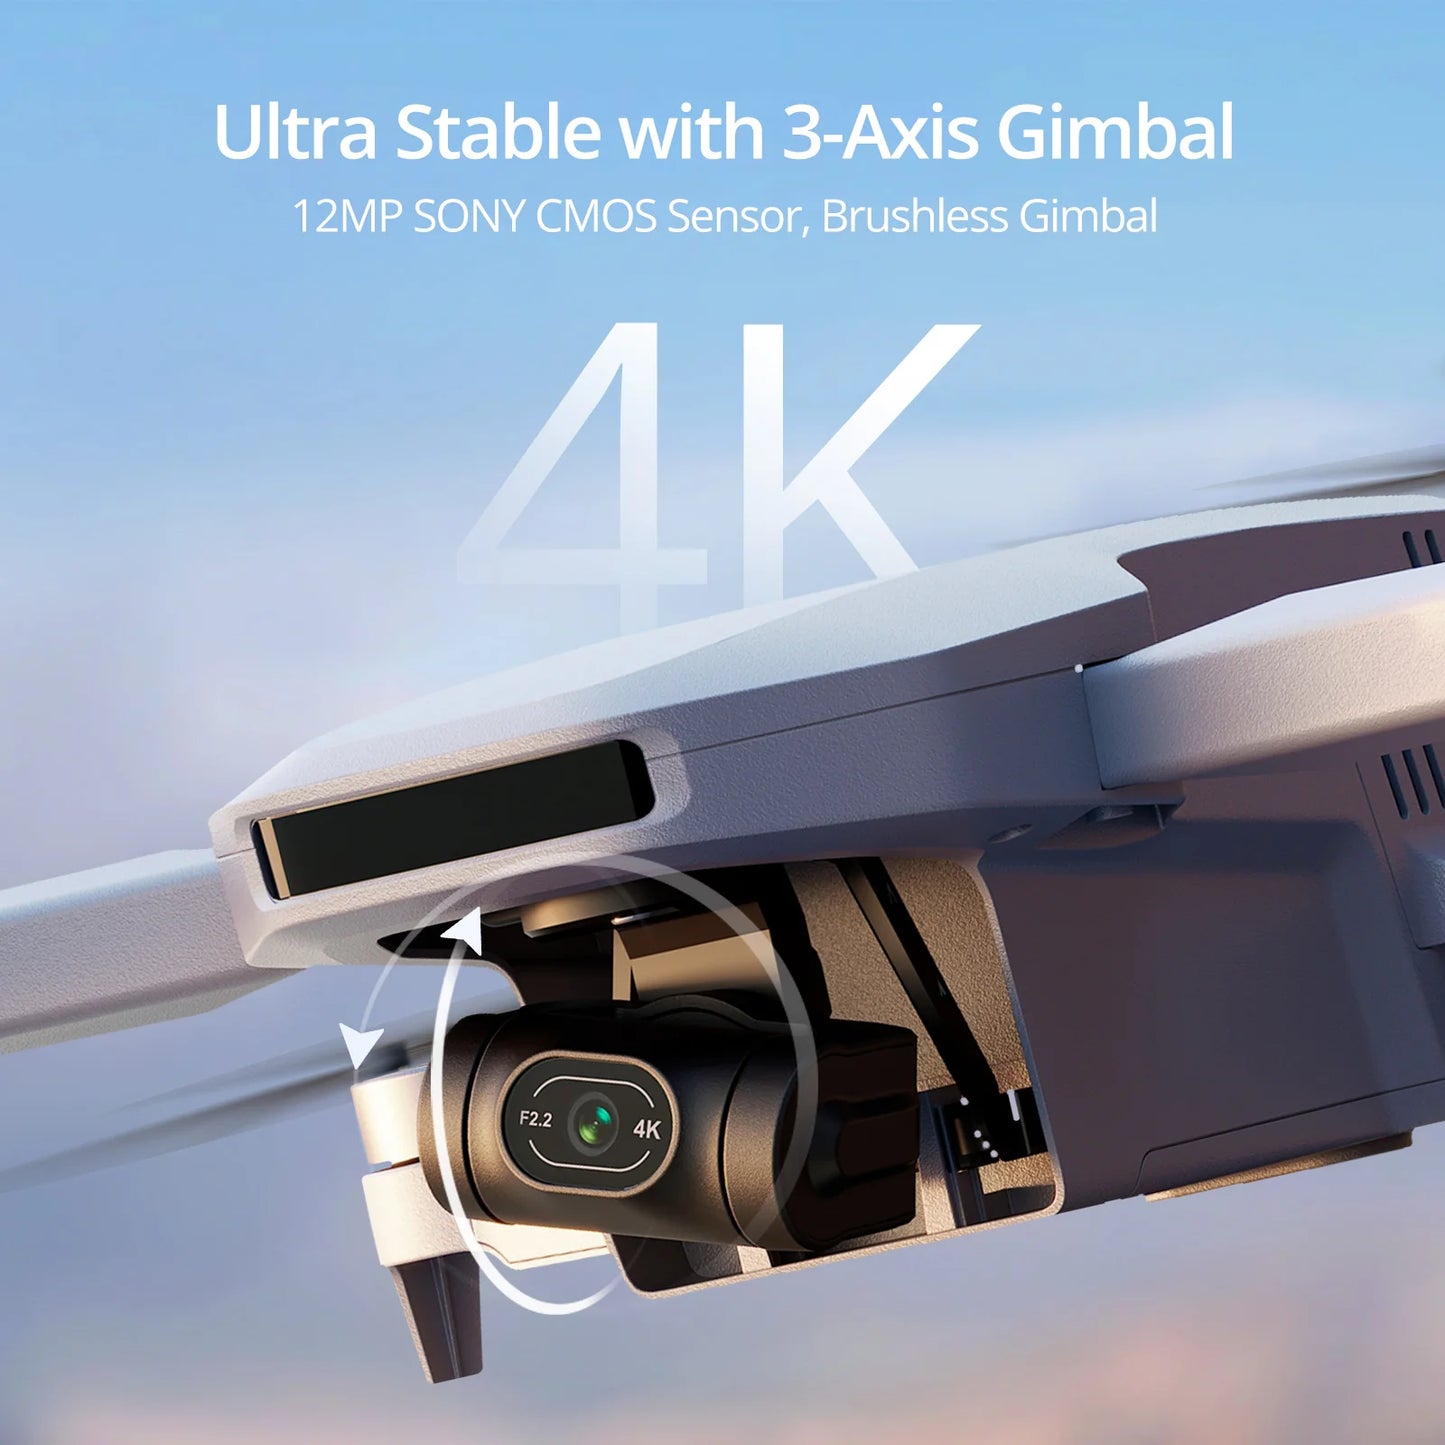 ATOM Premium Package 4K GPS Drone with 3-Axis Gimbal, 4 miles Video Transmission, Visual Tracking